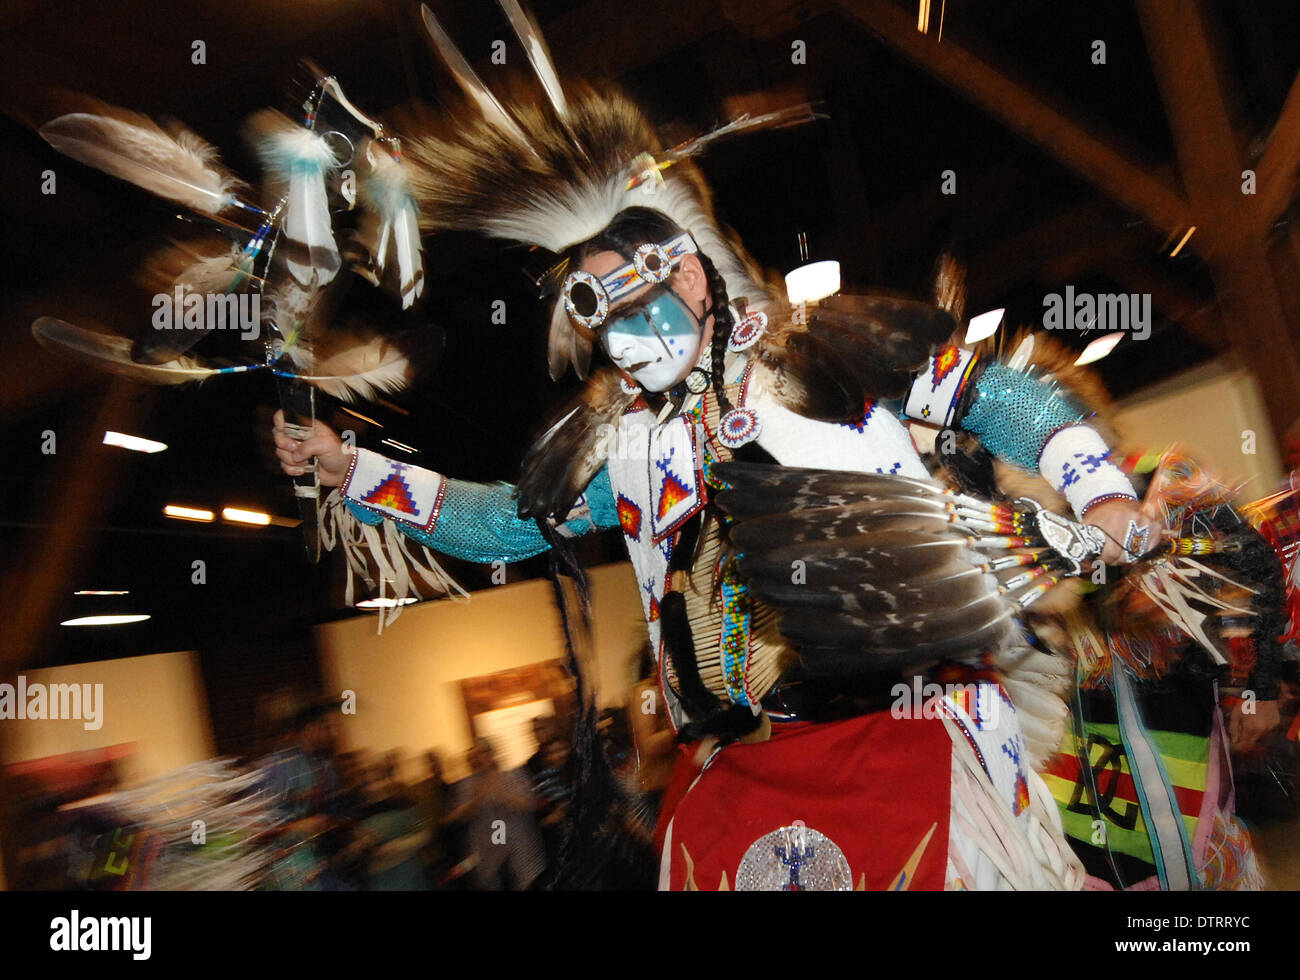 Vancouver, Canada. 23rd Feb, 2014. William White Buffalo of Cree Nation dances at the Native Indian Pow Wow as part of the annual Talking Stick Aboriginal Arts Festival in Vancouver, Canada, on Feb. 23, 2014. The Talking Stick Festival is a two-week celebration, aimed at preserving and promoting the language, culture and art forms of the First Nations people by developing and presenting aboriginal traditions of music, dance and storytelling in a contemporary and entertaining way. Credit:  Sergei Bachlakov/Xinhua/Alamy Live News Stock Photo